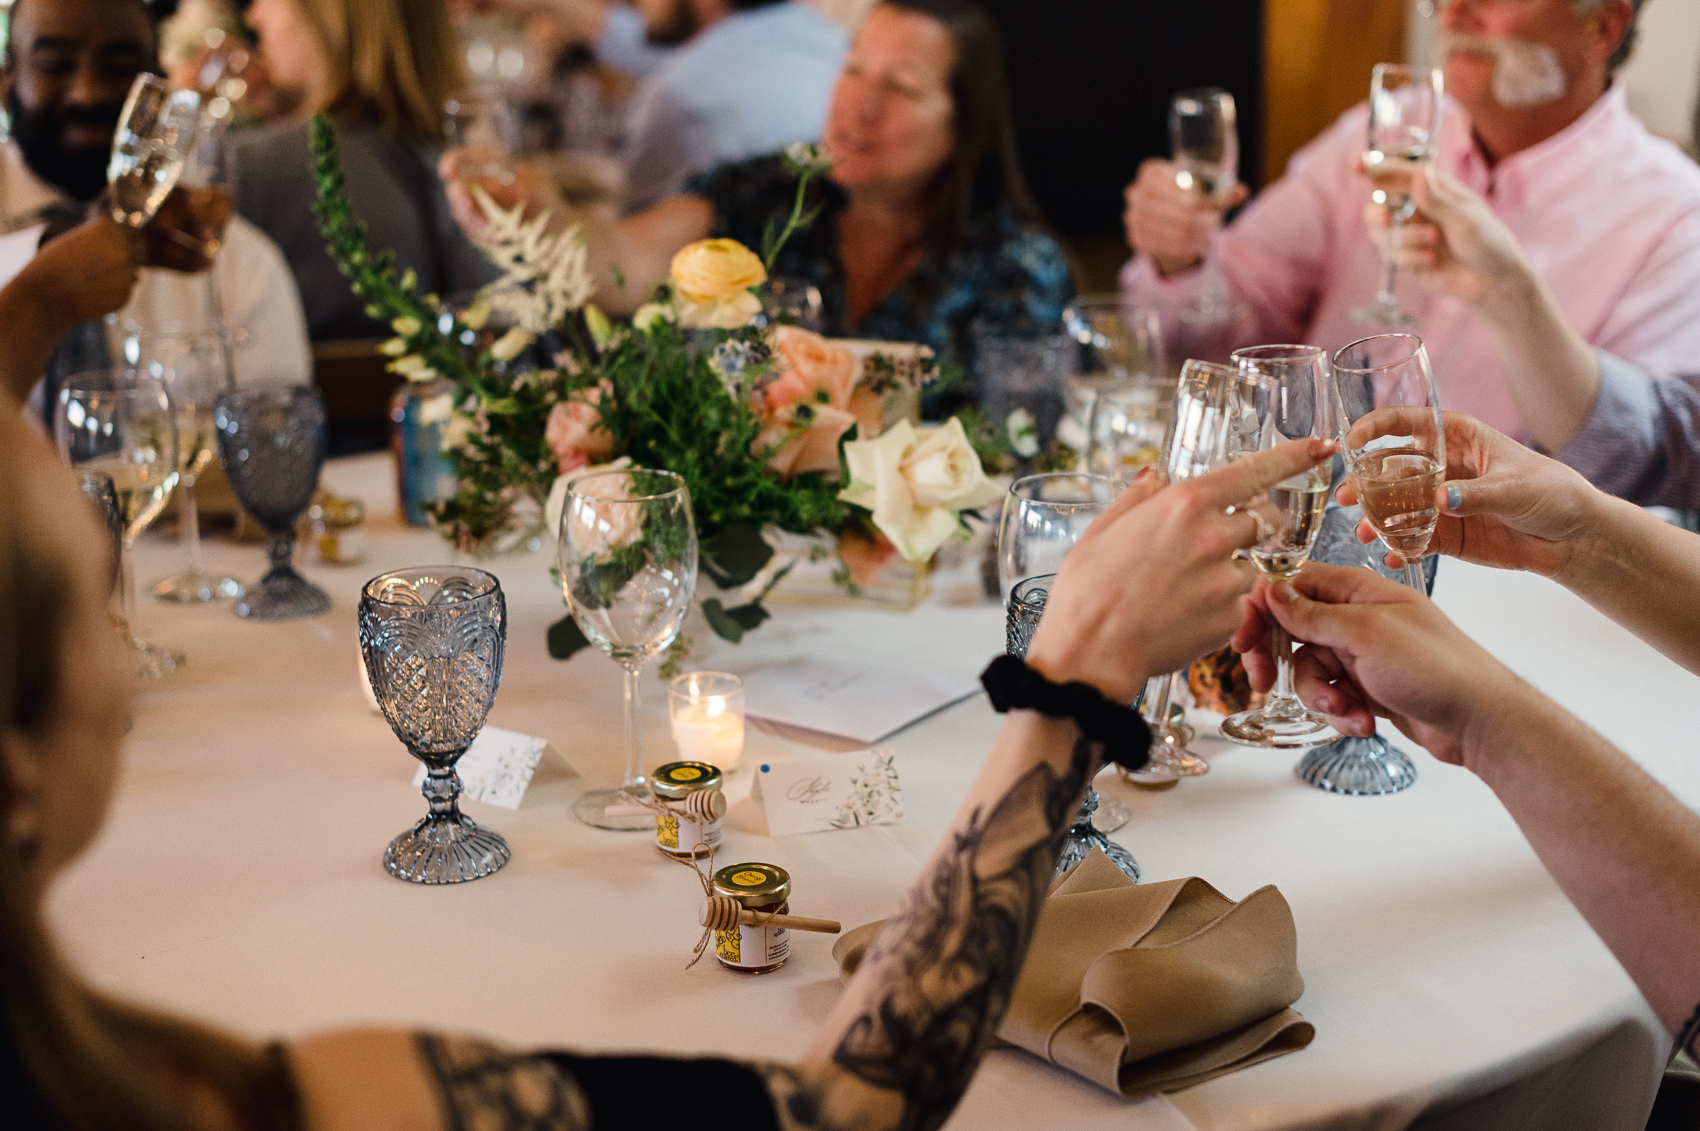 A group of family and friends laughing and toasting in celebration of the couple's boulder colorado wedding, radiating joy and love at the reception.